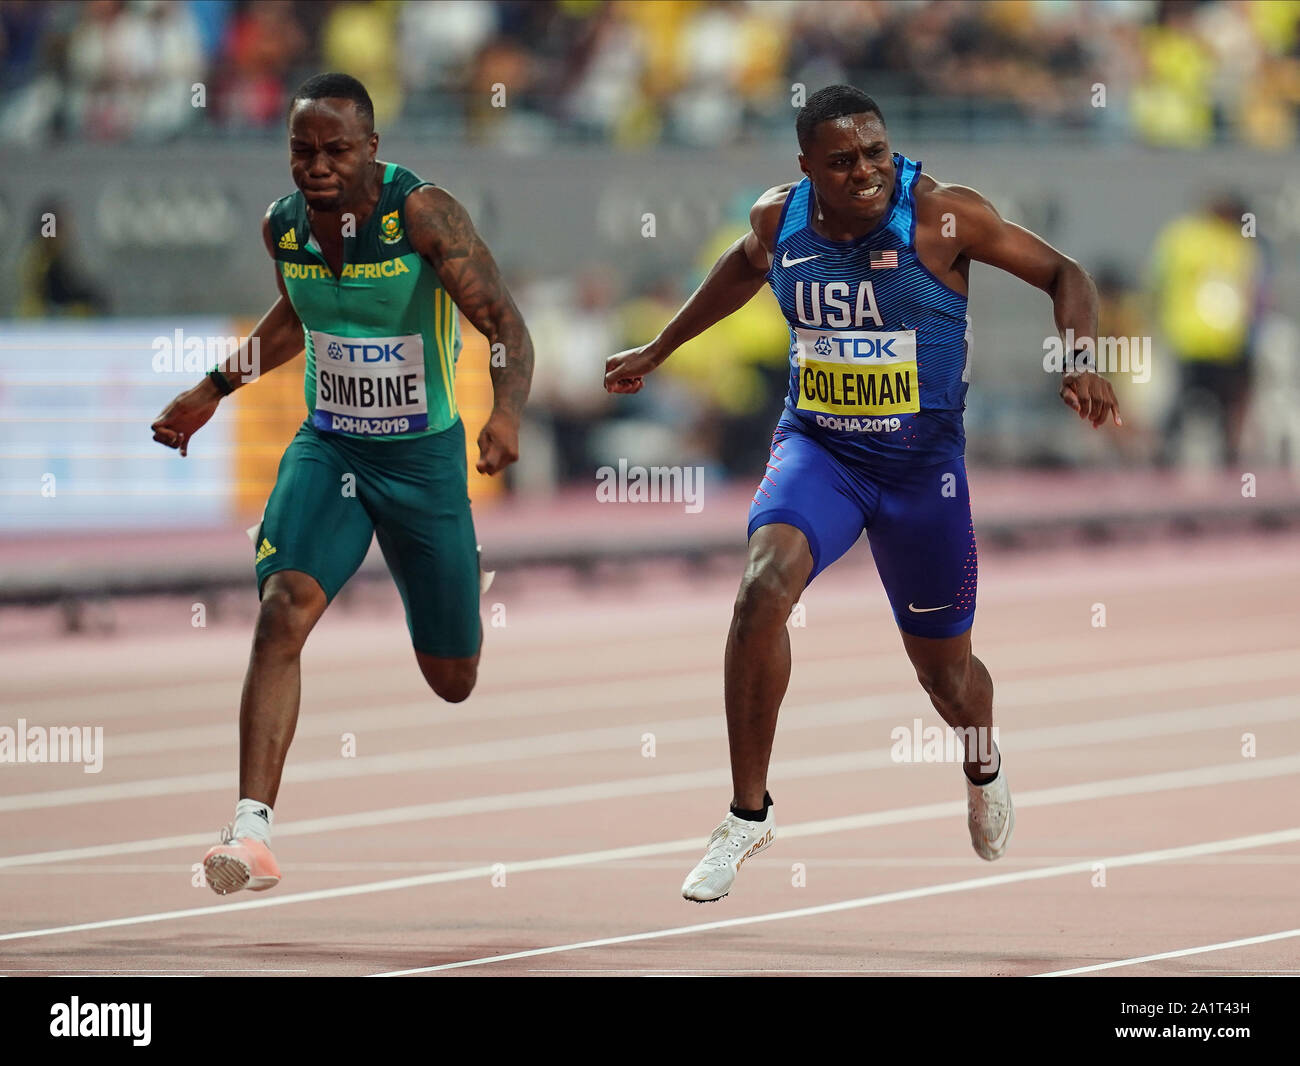 Doha, Qatar. 28th Sep, 2019. Christian Coleman of United States winning the world championship in the 100 meter for men during the 17th IAAF World Athletics Championships at the Khalifa Stadium in Doha, Qatar. Ulrik Pedersen/CSM/Alamy Live News Stock Photo